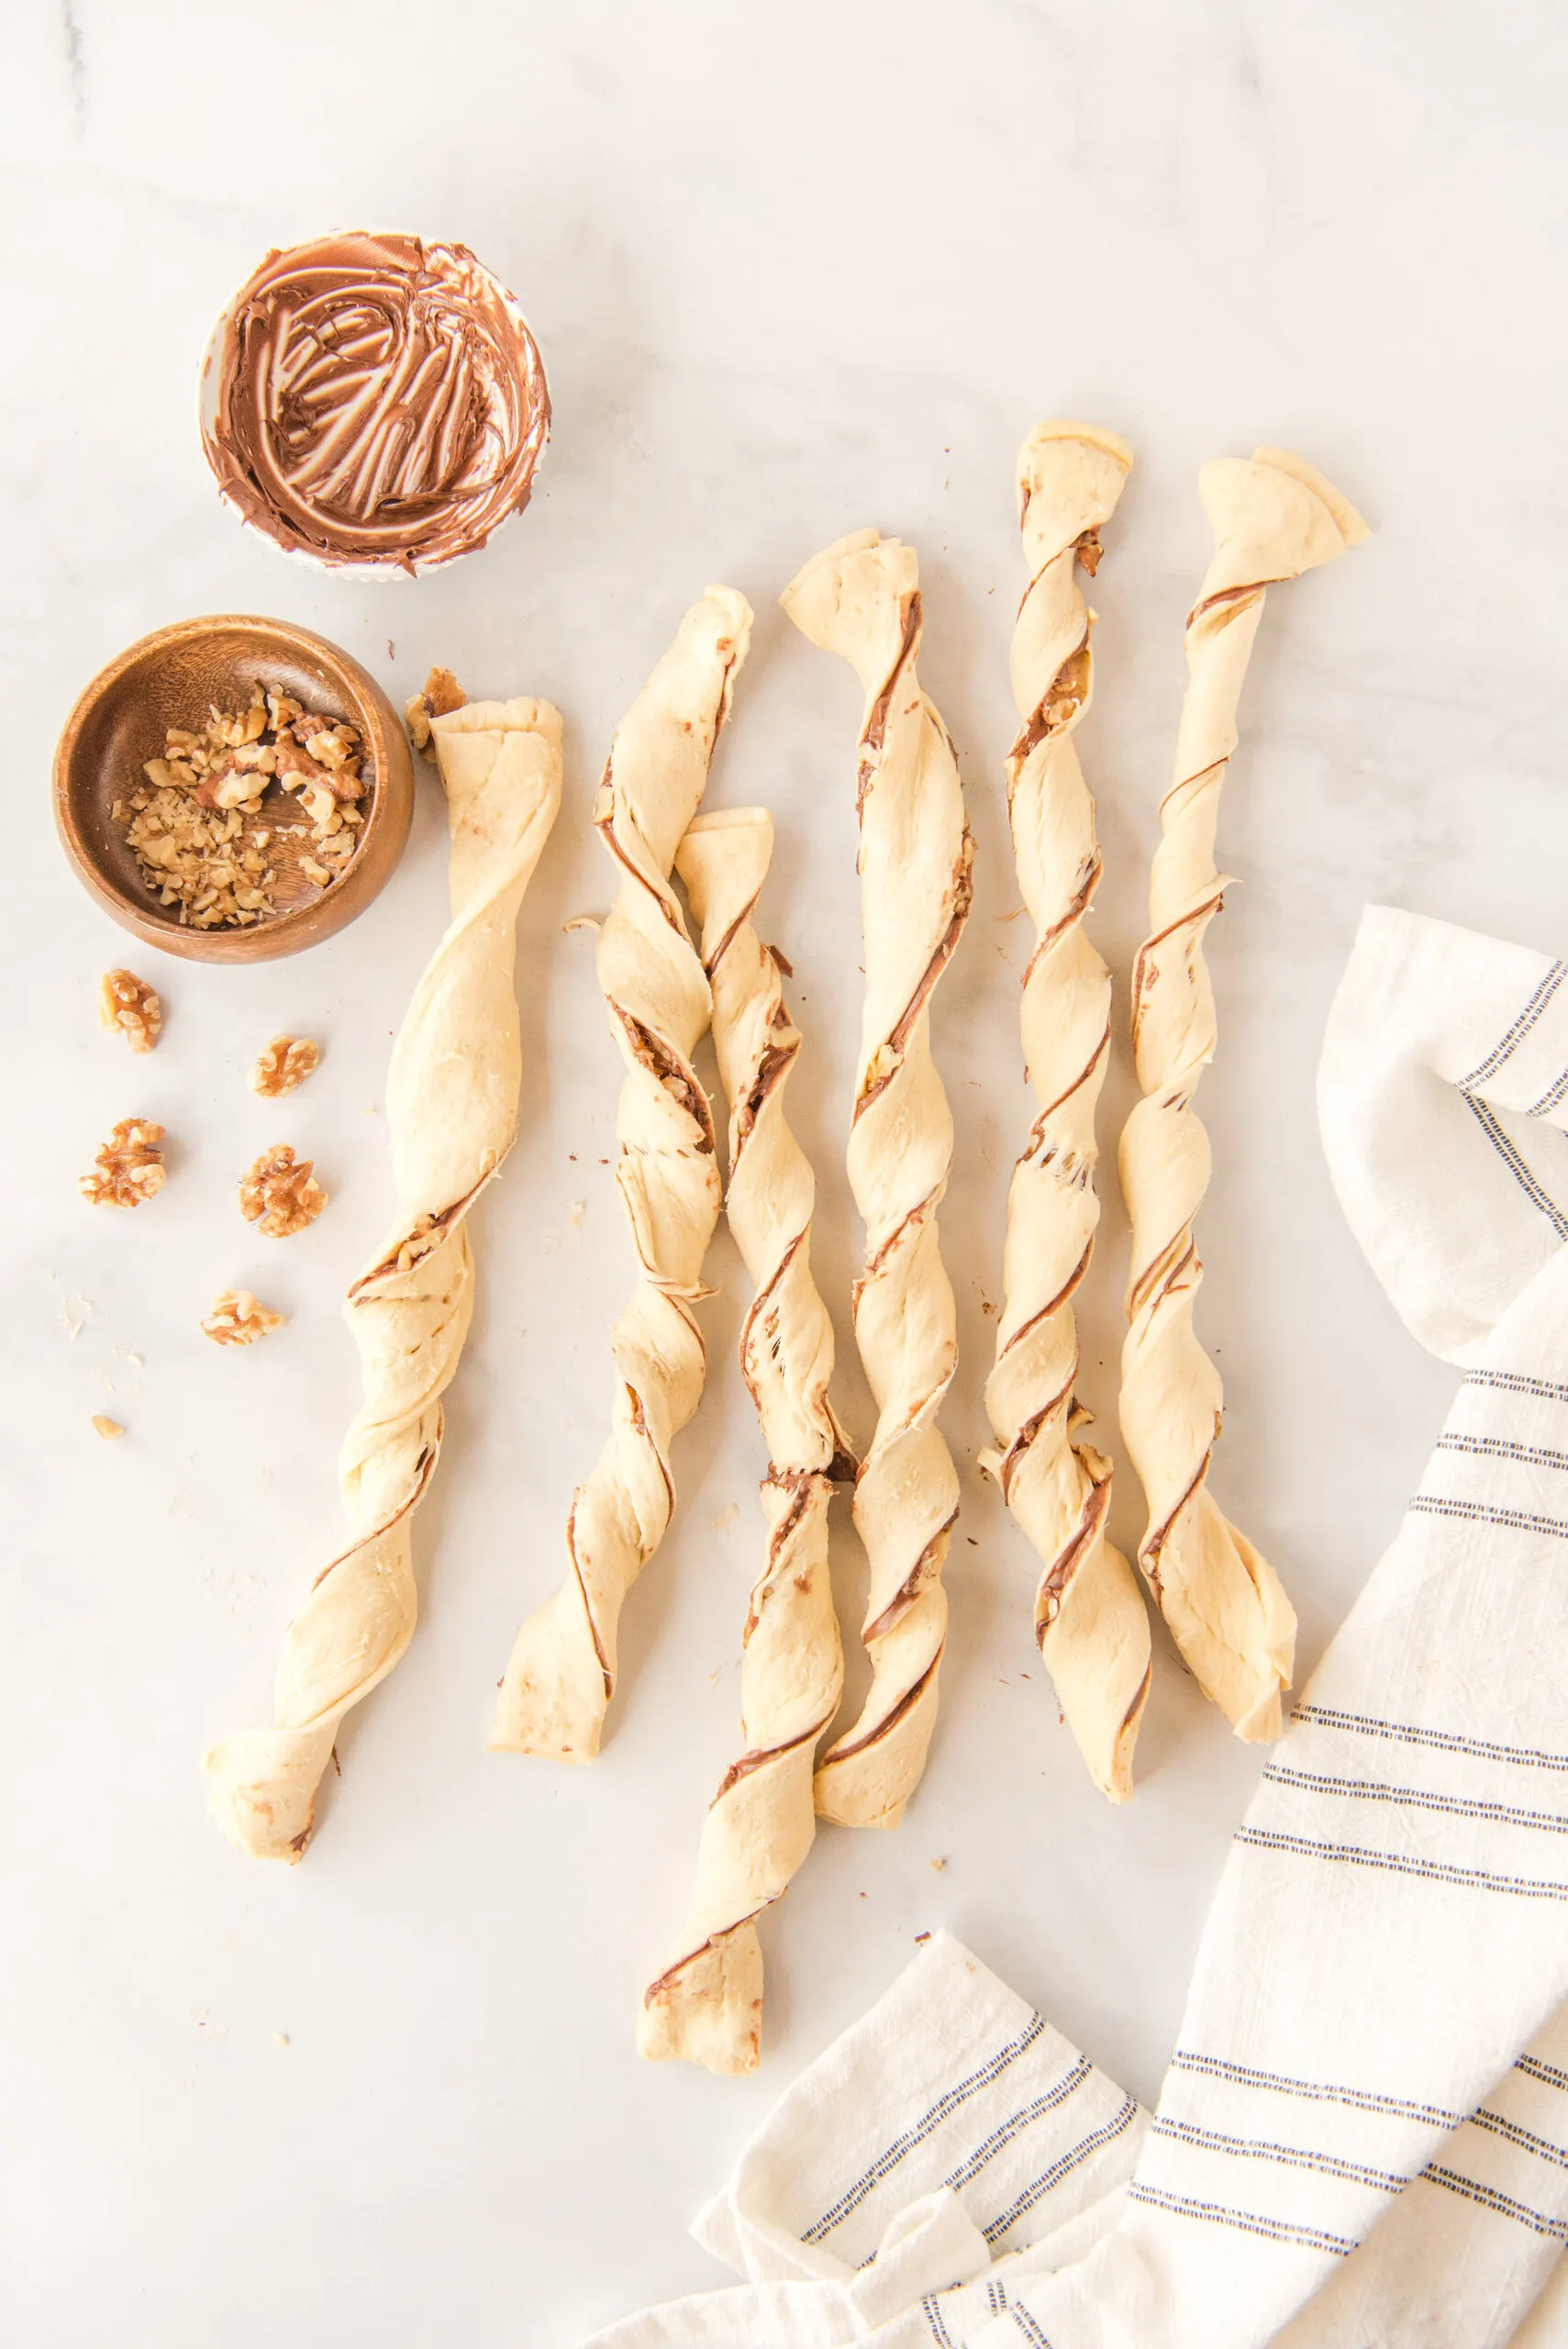 six twists of crescent roll dough filled with Nutella and walnuts